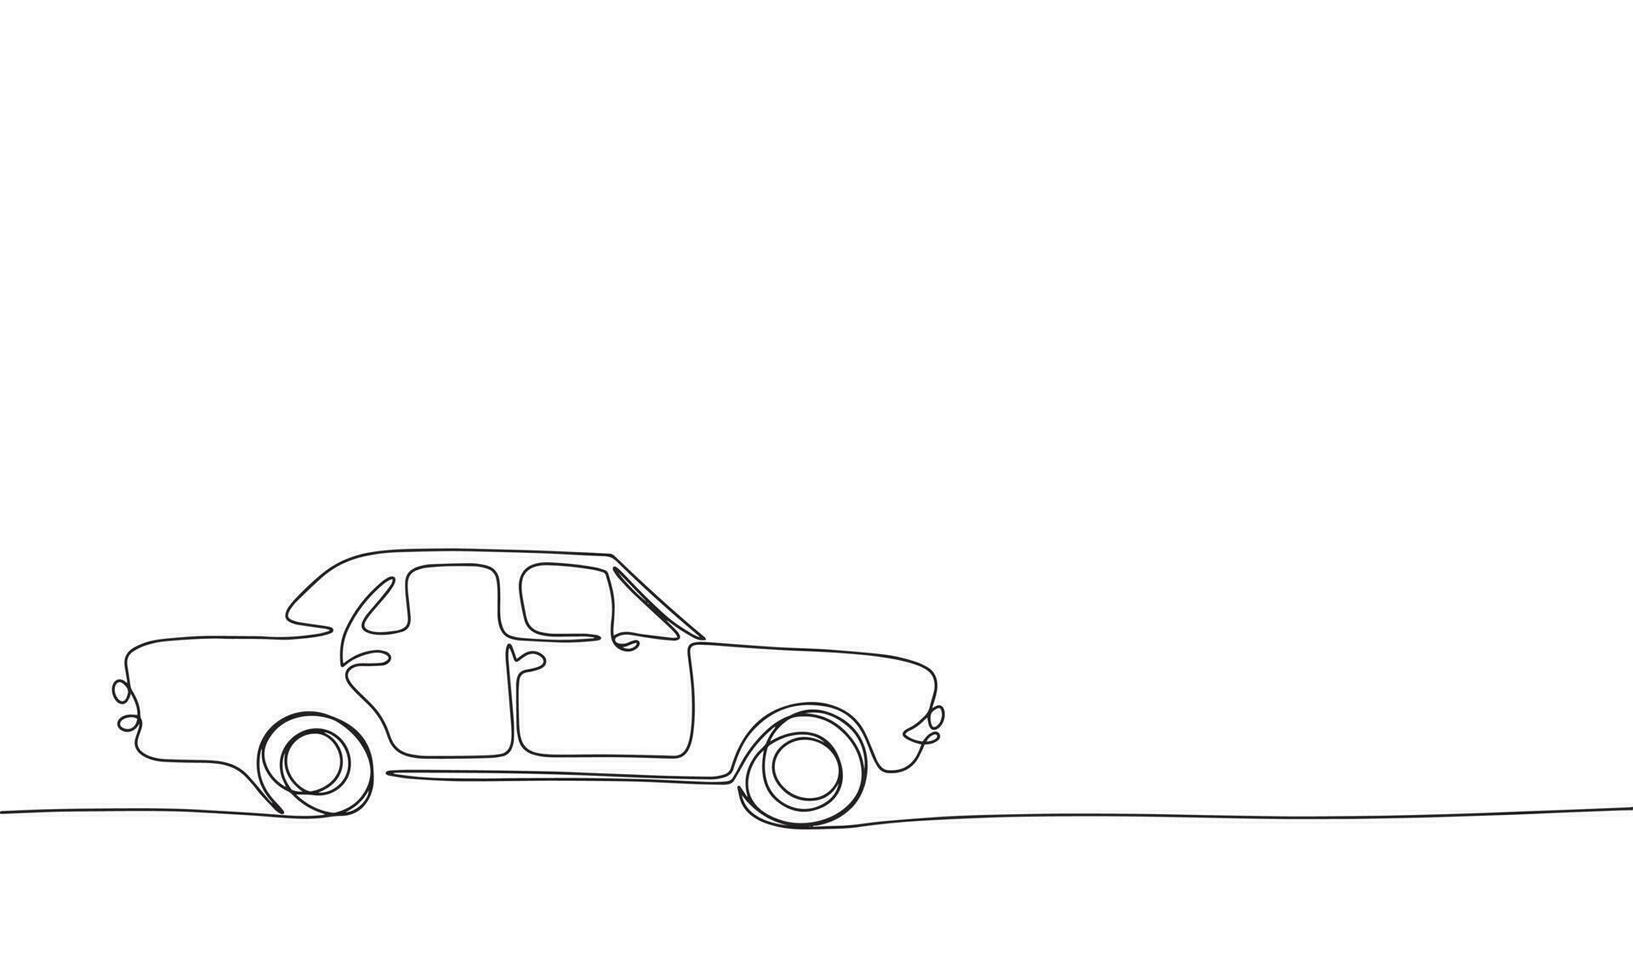 Retro car. Continuous line one drawing. Vector illustration. Simple line illustration.